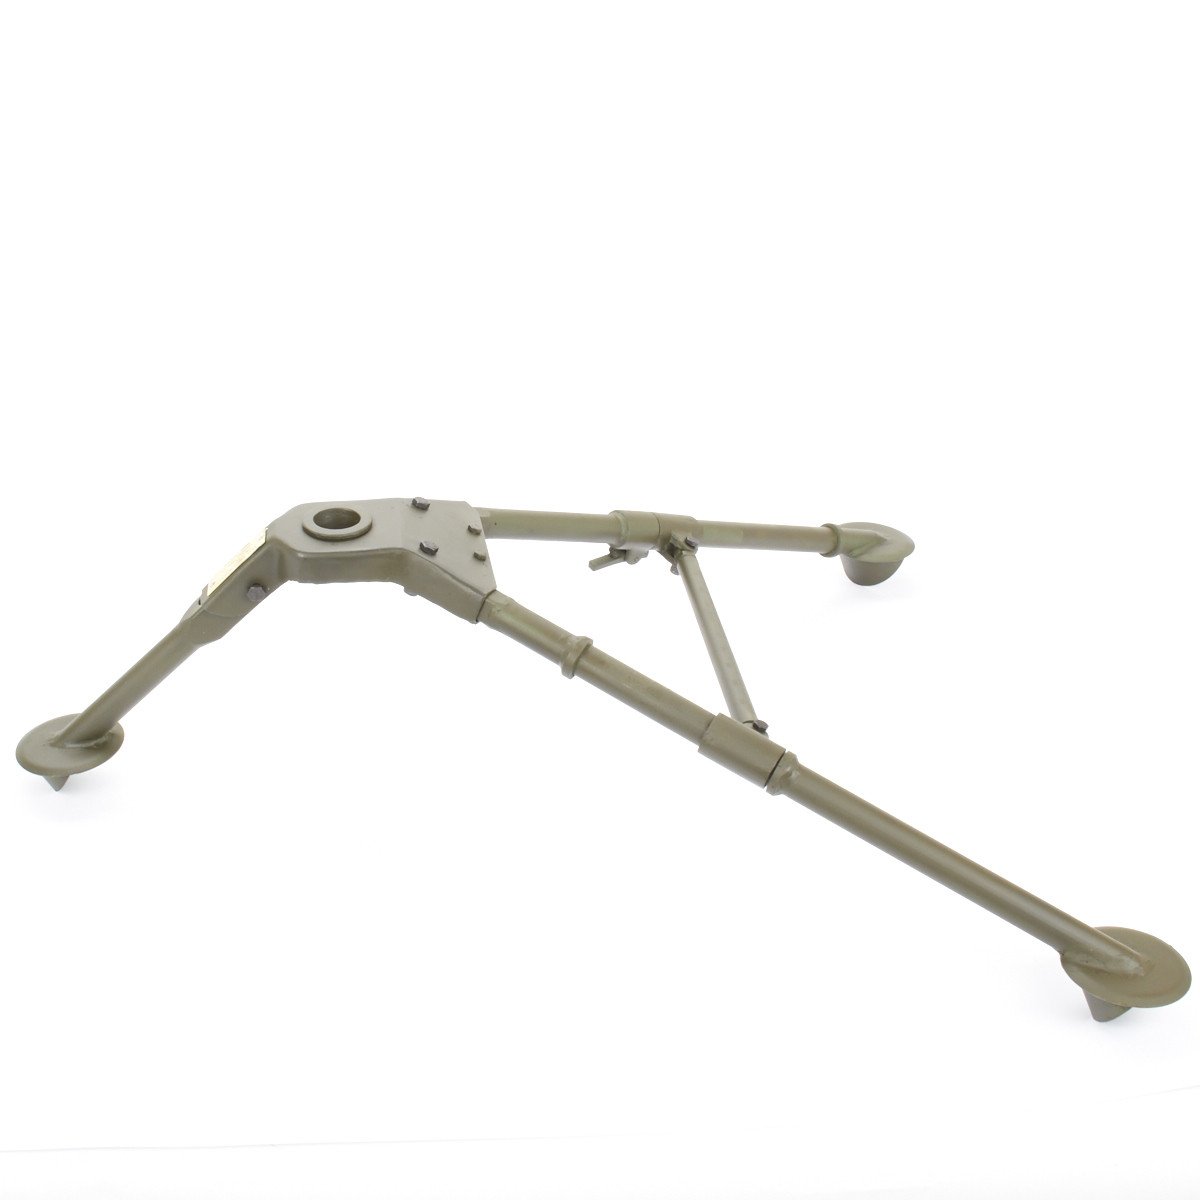 U.S. Browning M1919A4 .30 cal M2 Tripod with Pintle